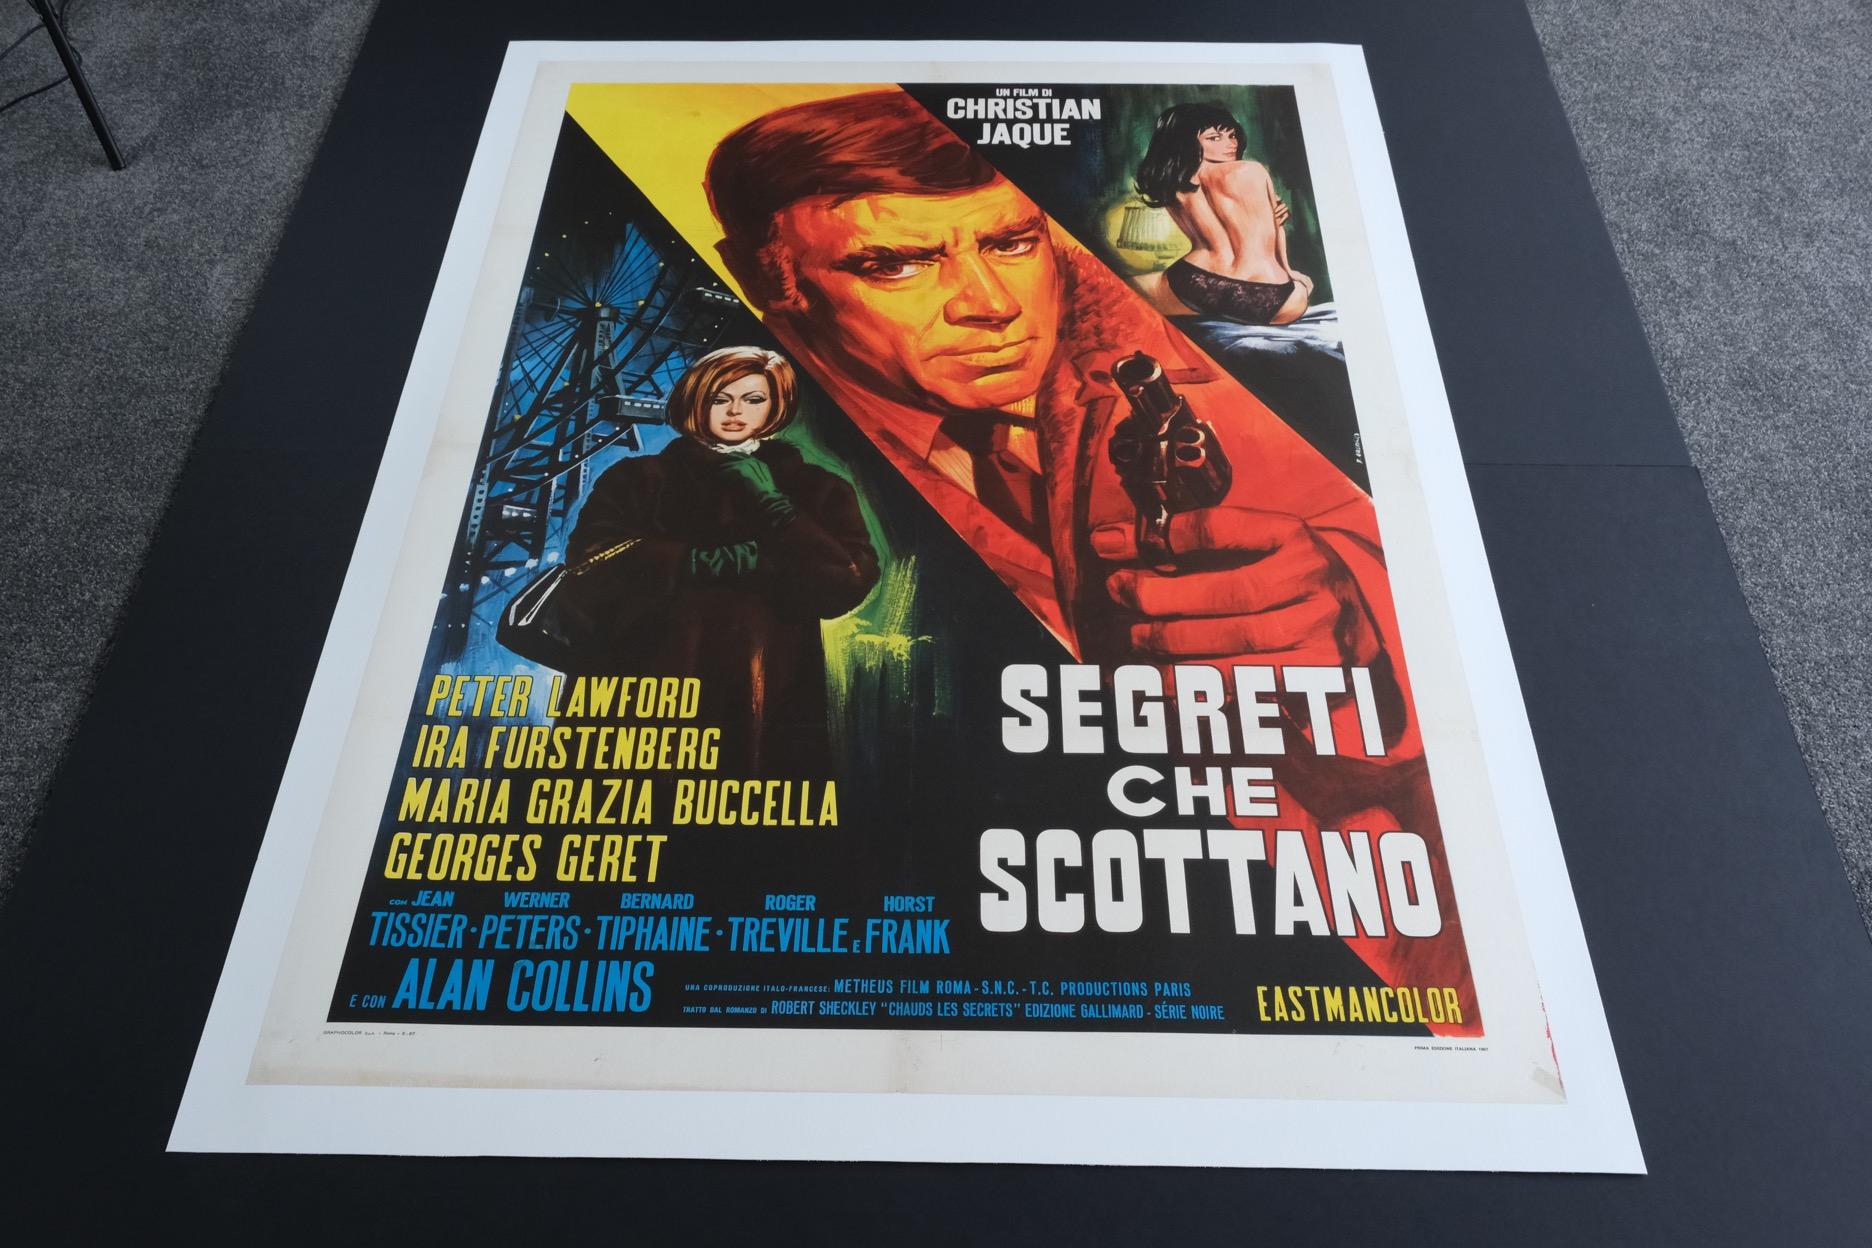 Size: Italian Two Sheet

Condition: Mint

Dimensions: 1500mm x 1095mm (inc. Linen Border)

Type: Original Lithographic Print - Linen Backed

Year: 1967

Details: A rare artwork for the 1967 Italian release of the film ‘Dead Run’ / ‘Segreti